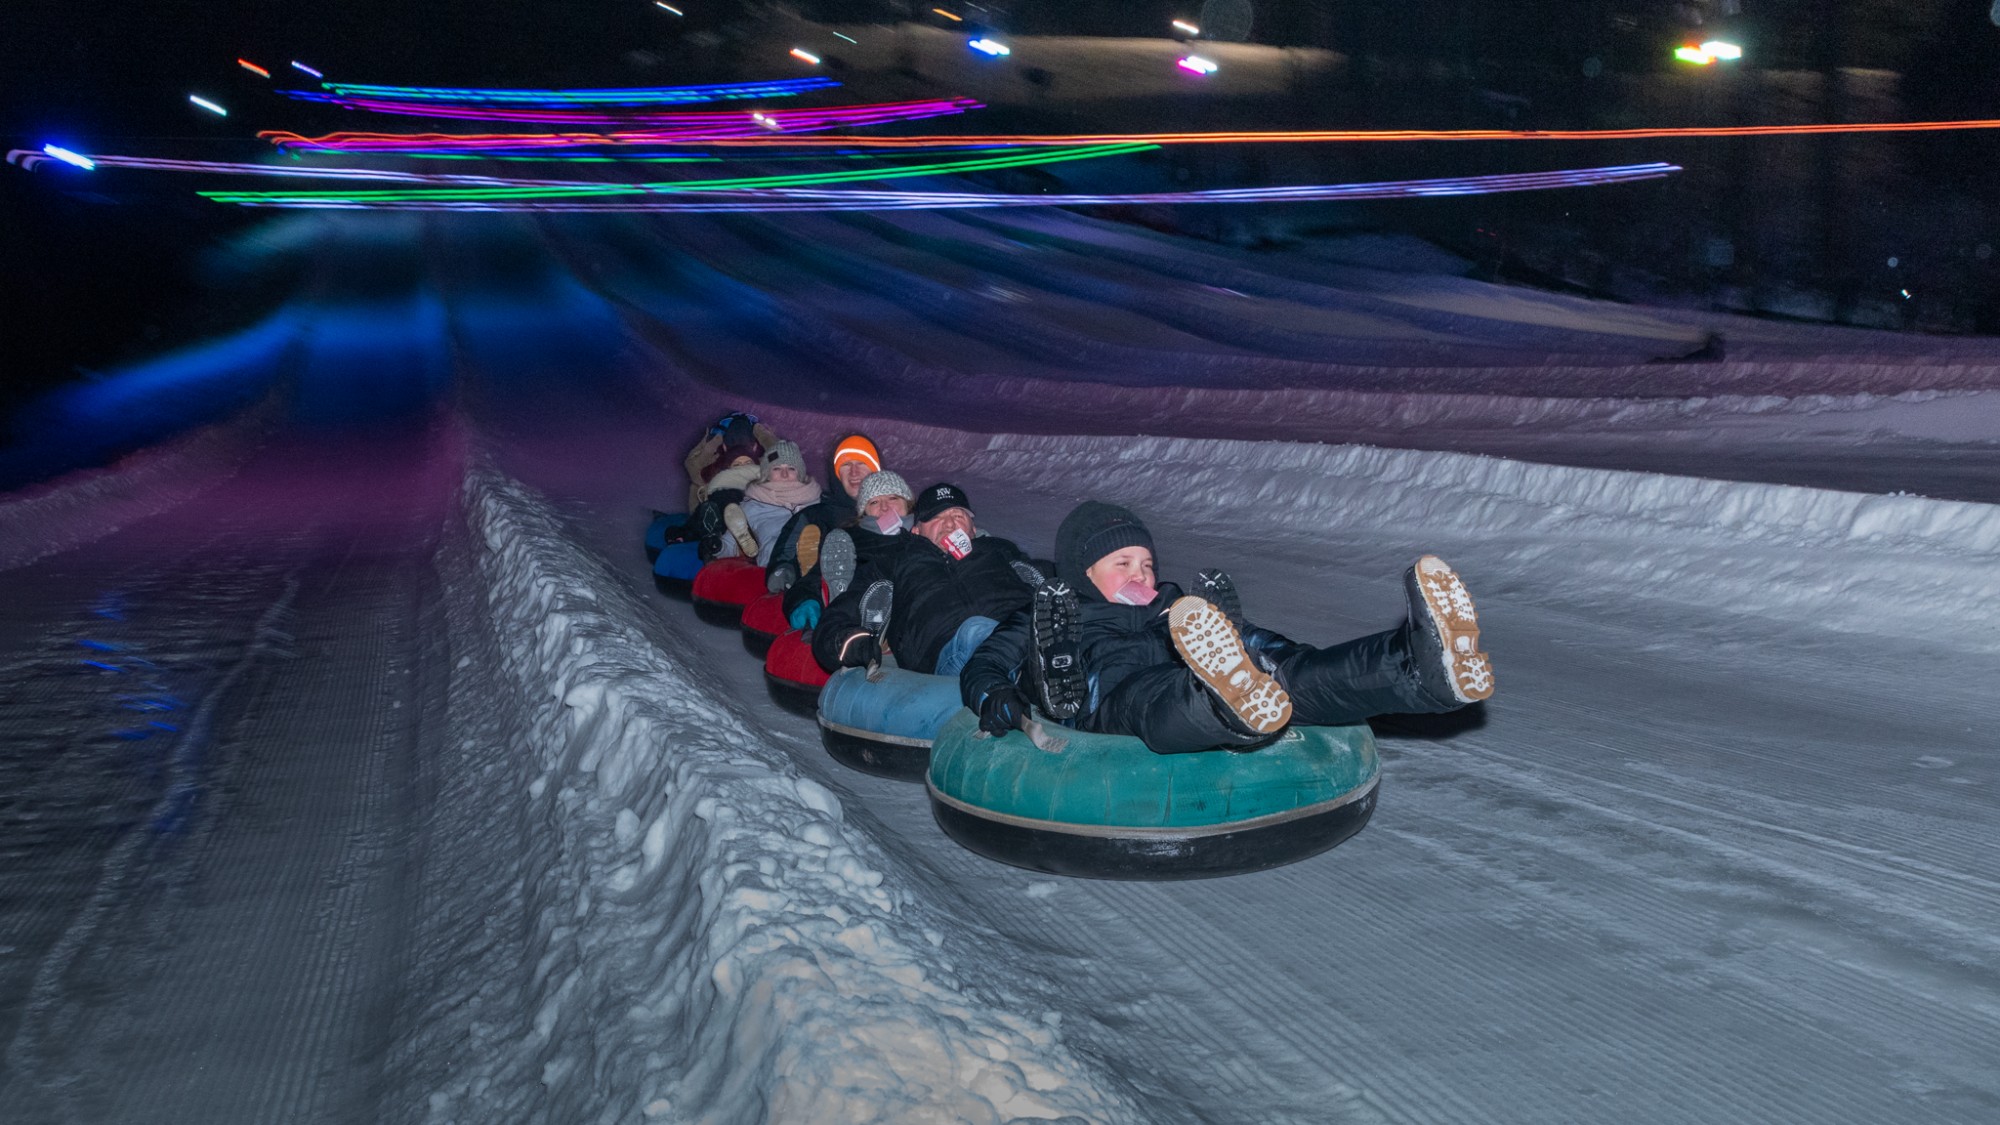 Snow Tubing For Toddlers Near Me - My Amelia Snow Tubing Near Albany Ny